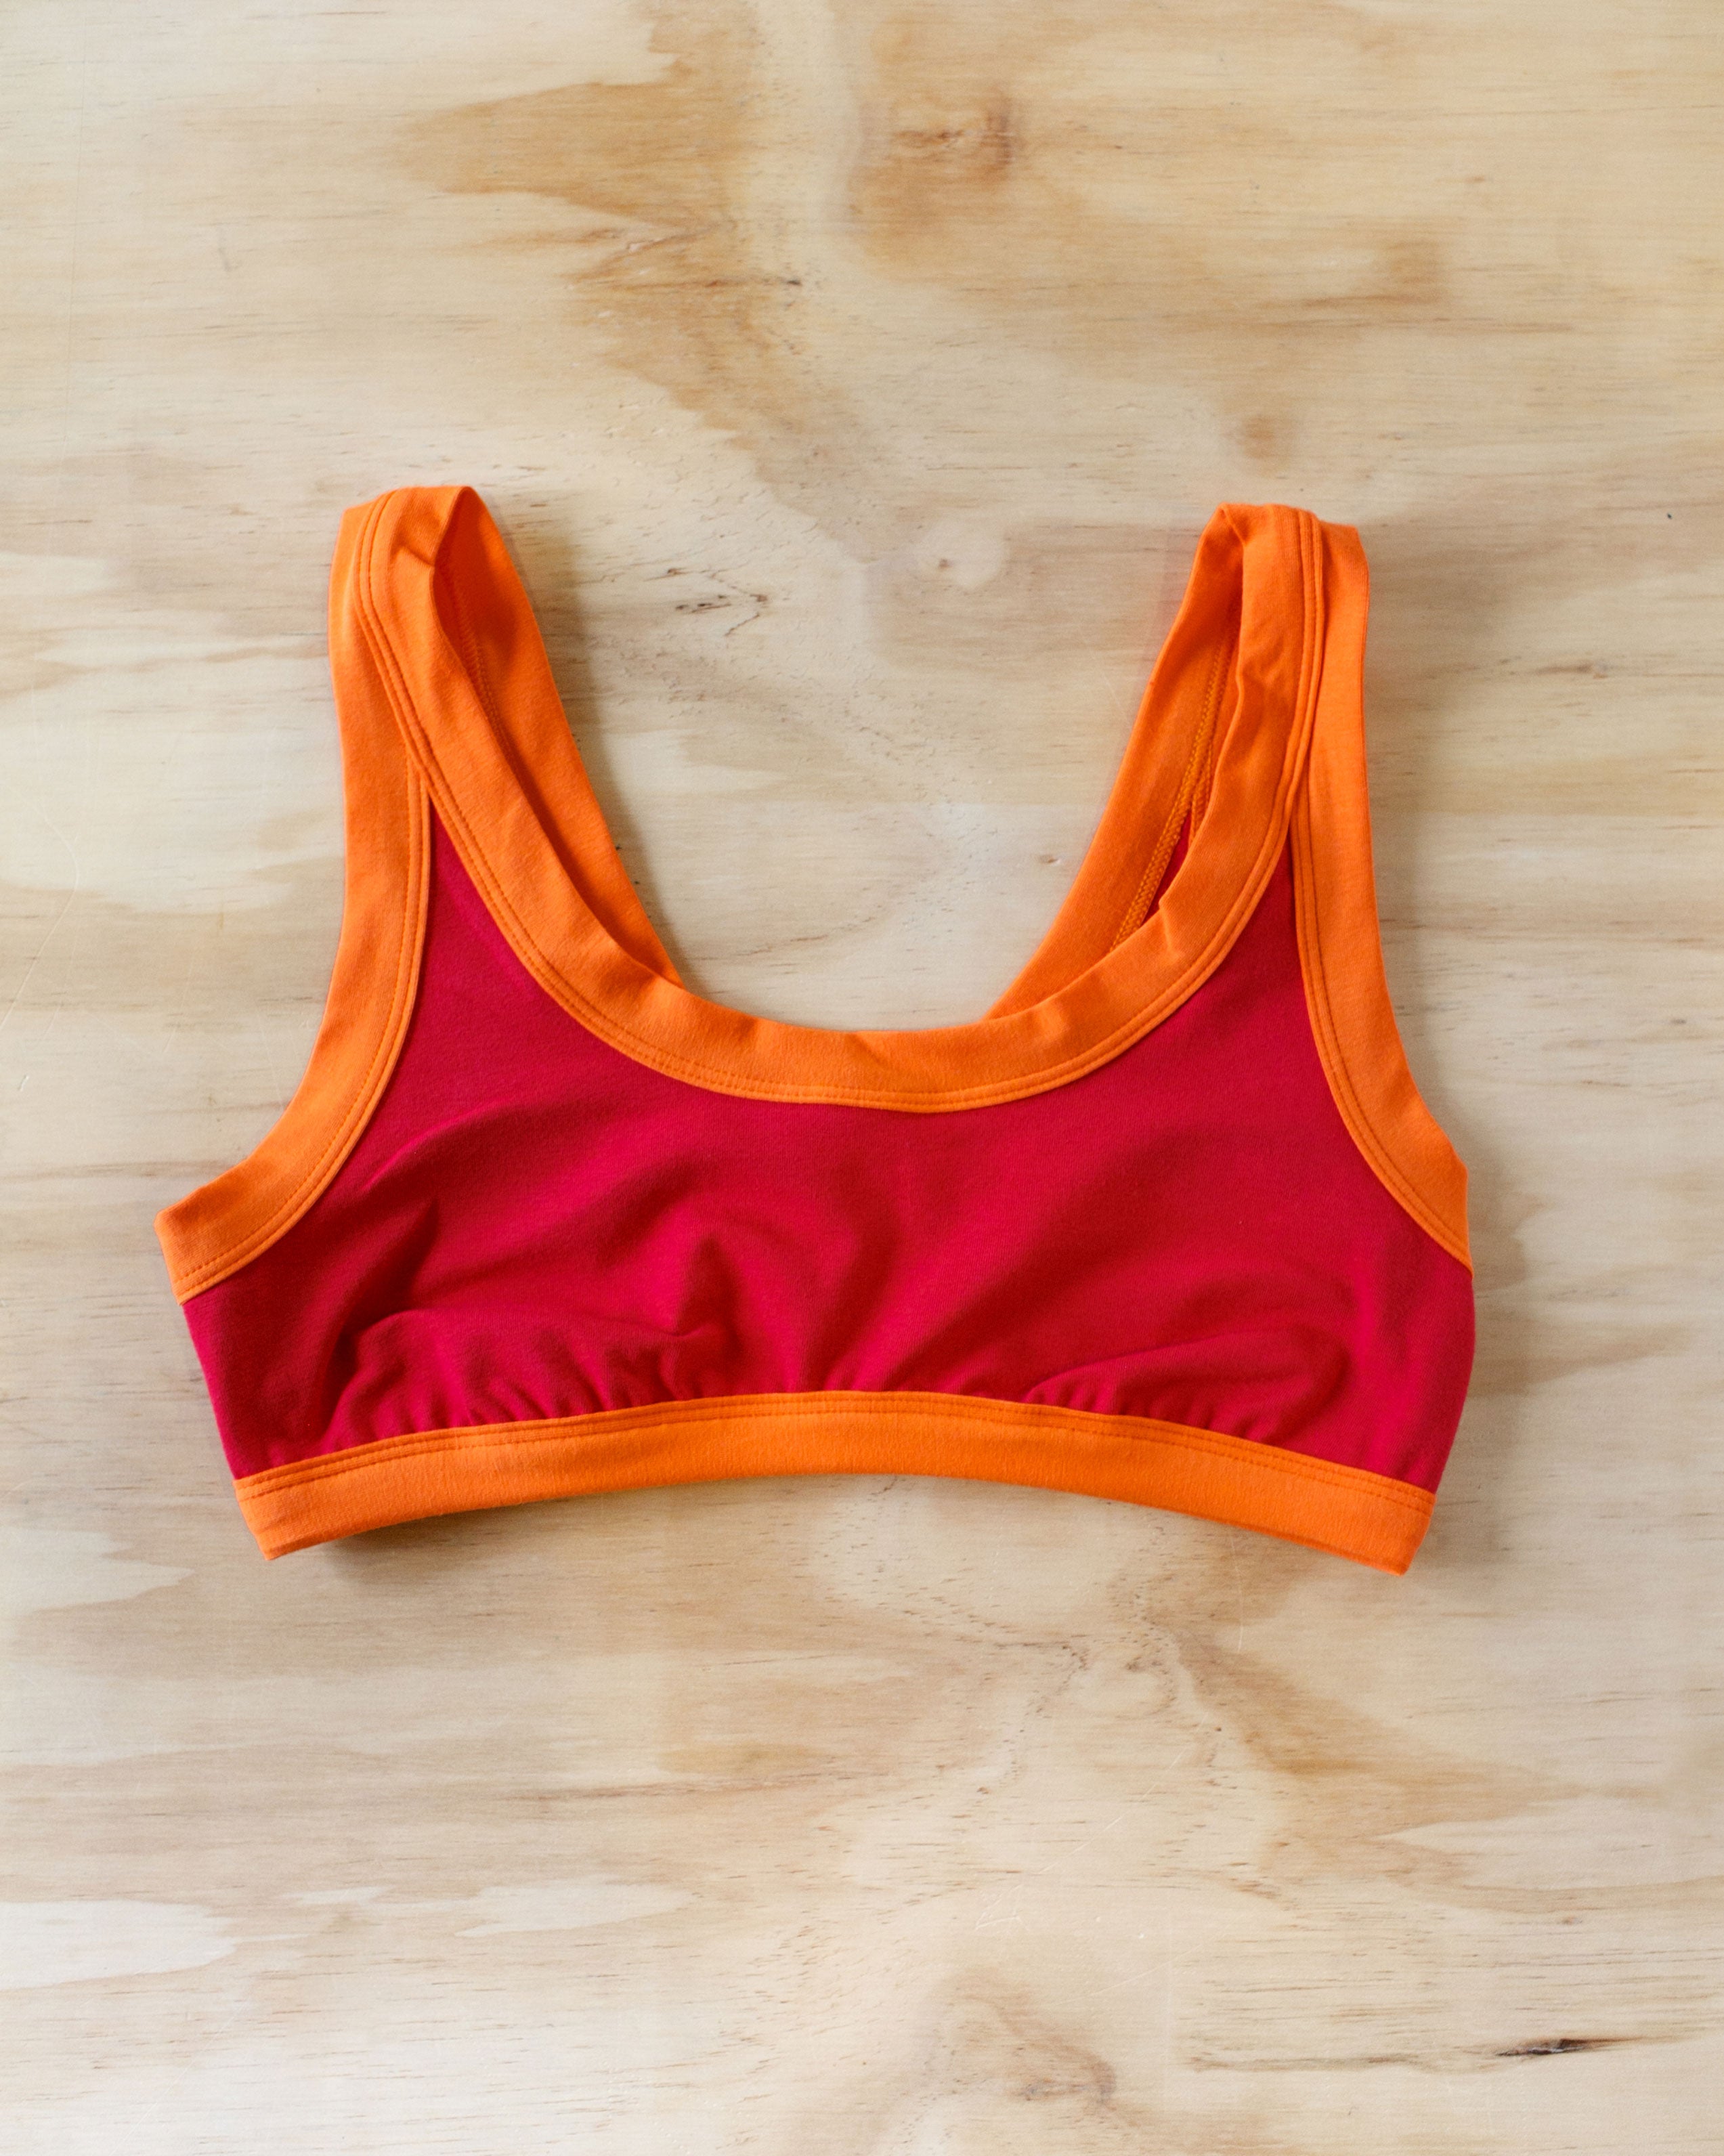 Flat lay of Bralette in Pants on Fire: red with orange binding.